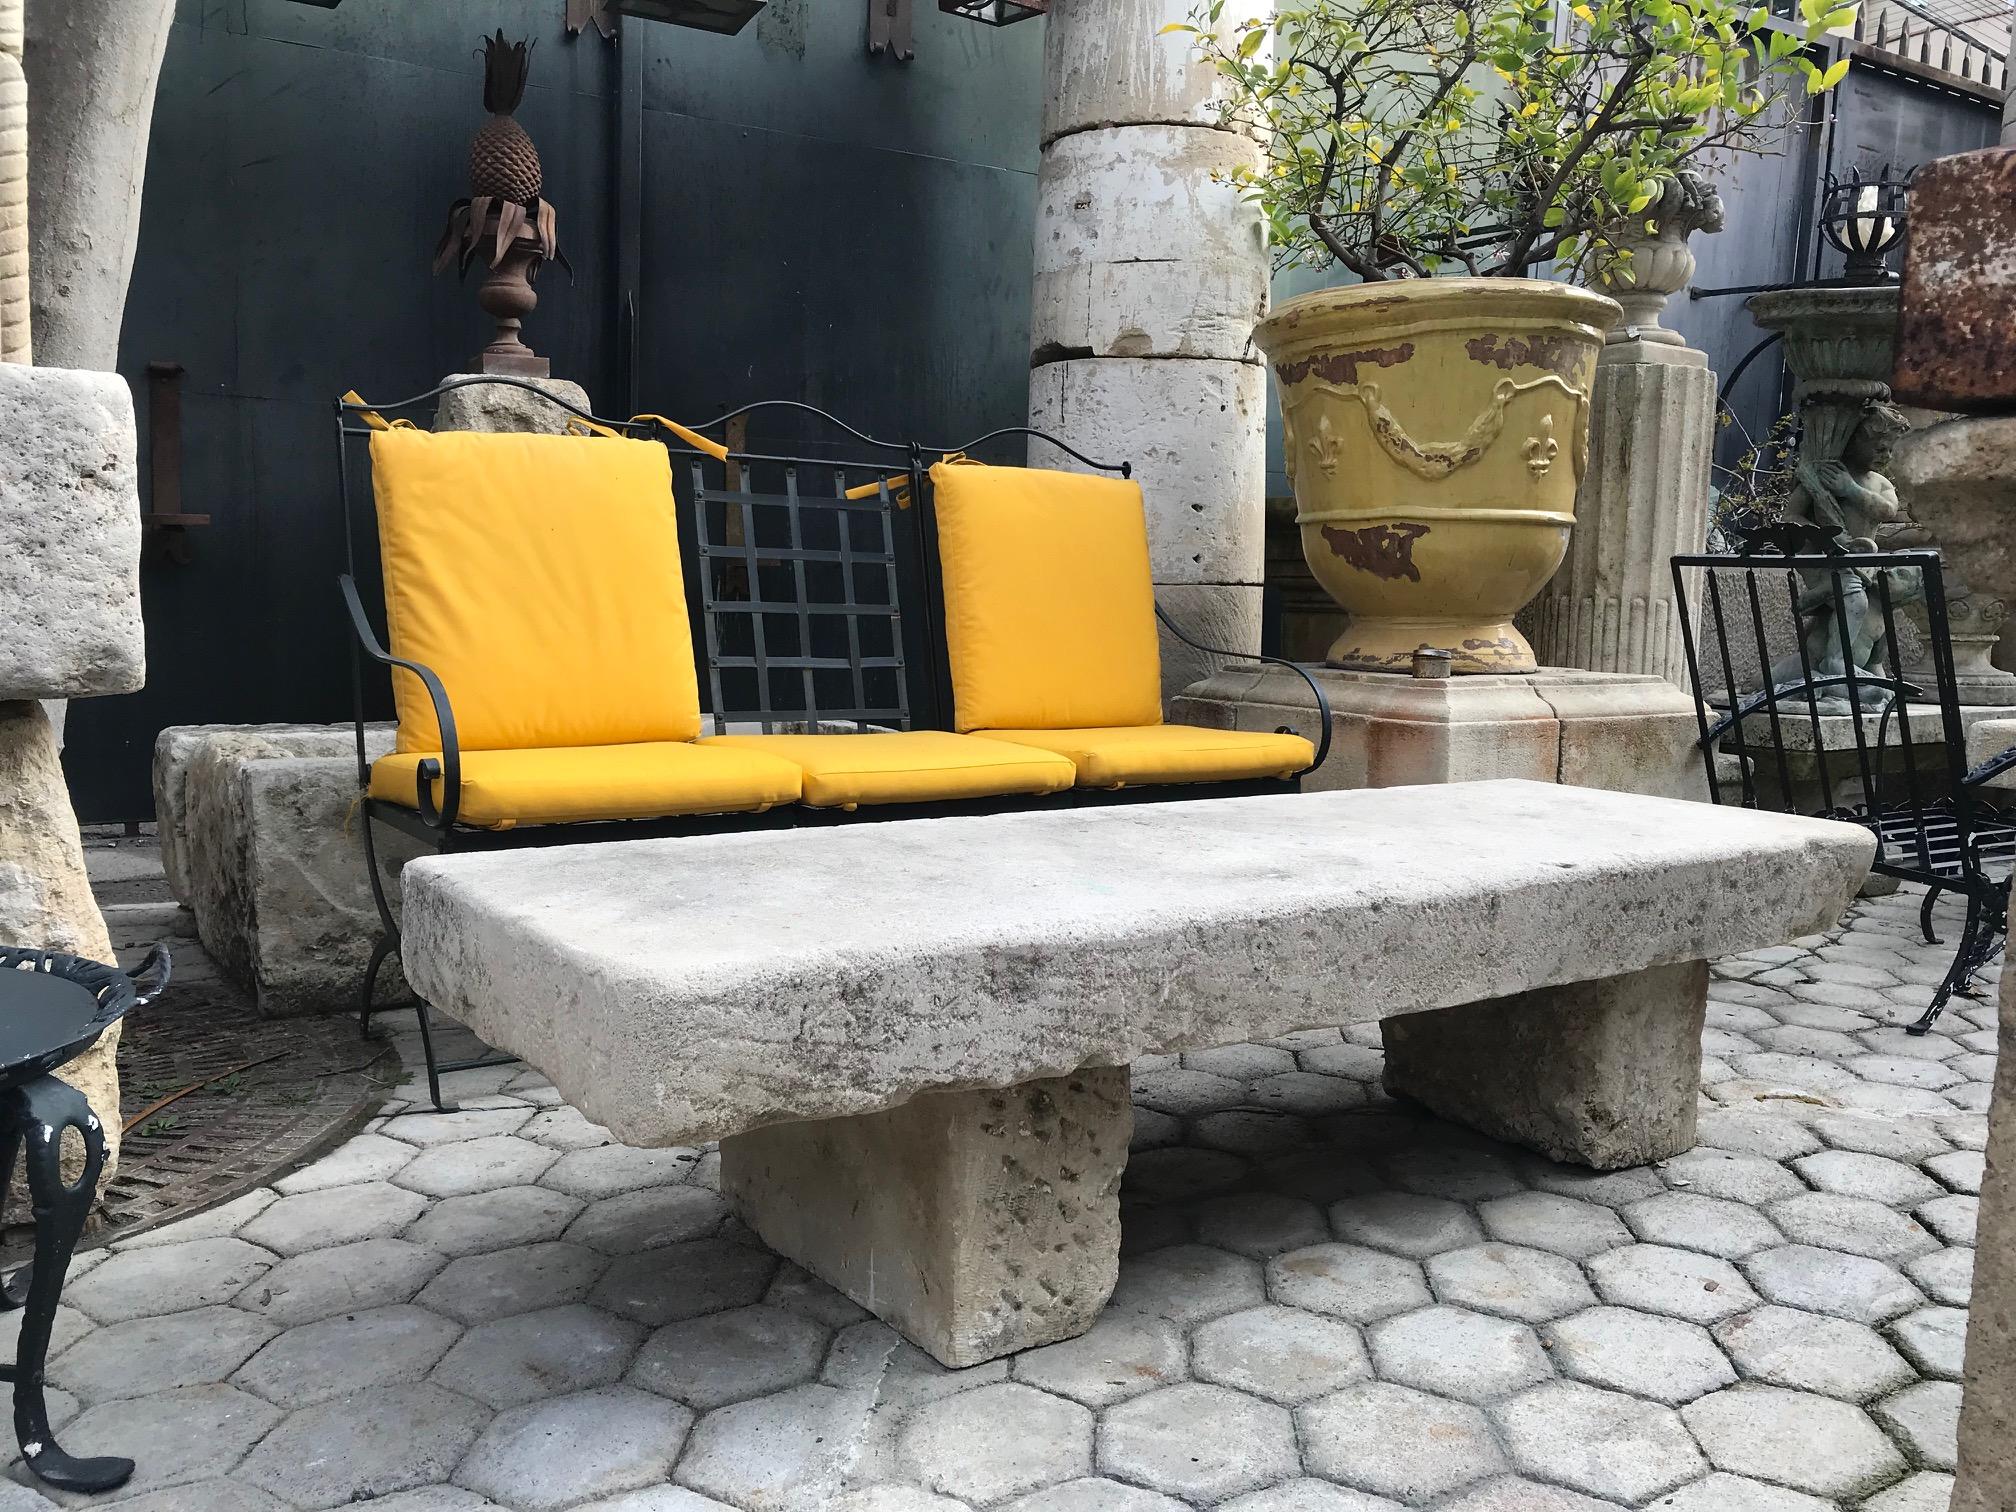 18th-19th century carved stone antique garden low coffee outdoor indoor table. It will be the perfect touch by an outdoor fireplace , This table has a lot of charm and character. It can work in a Mid-Century Modern or an old charm rustic Provençal